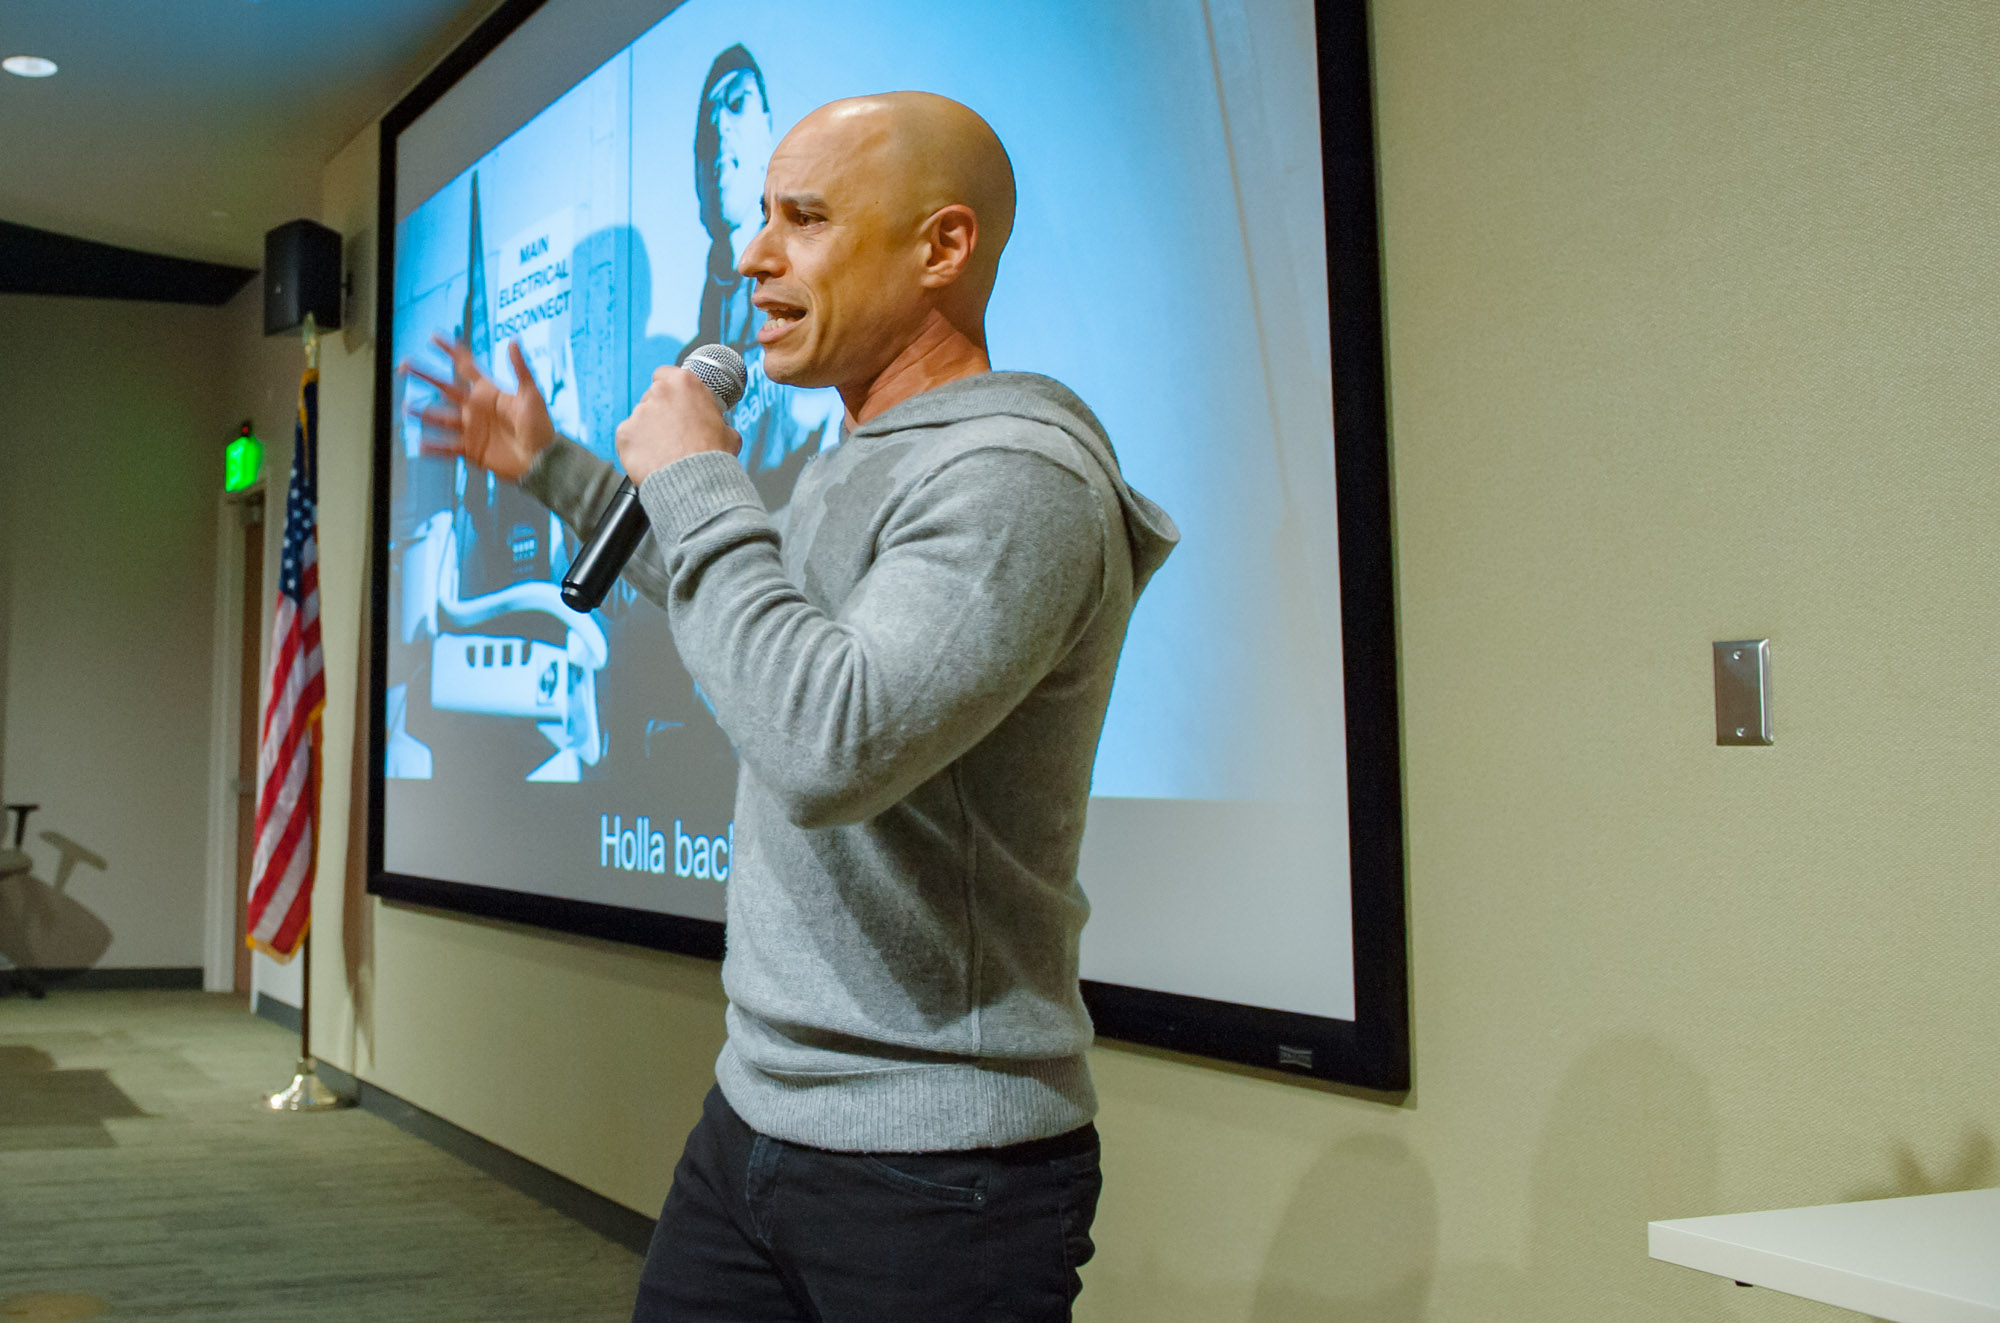 ZDoggMD speaking to the crowd